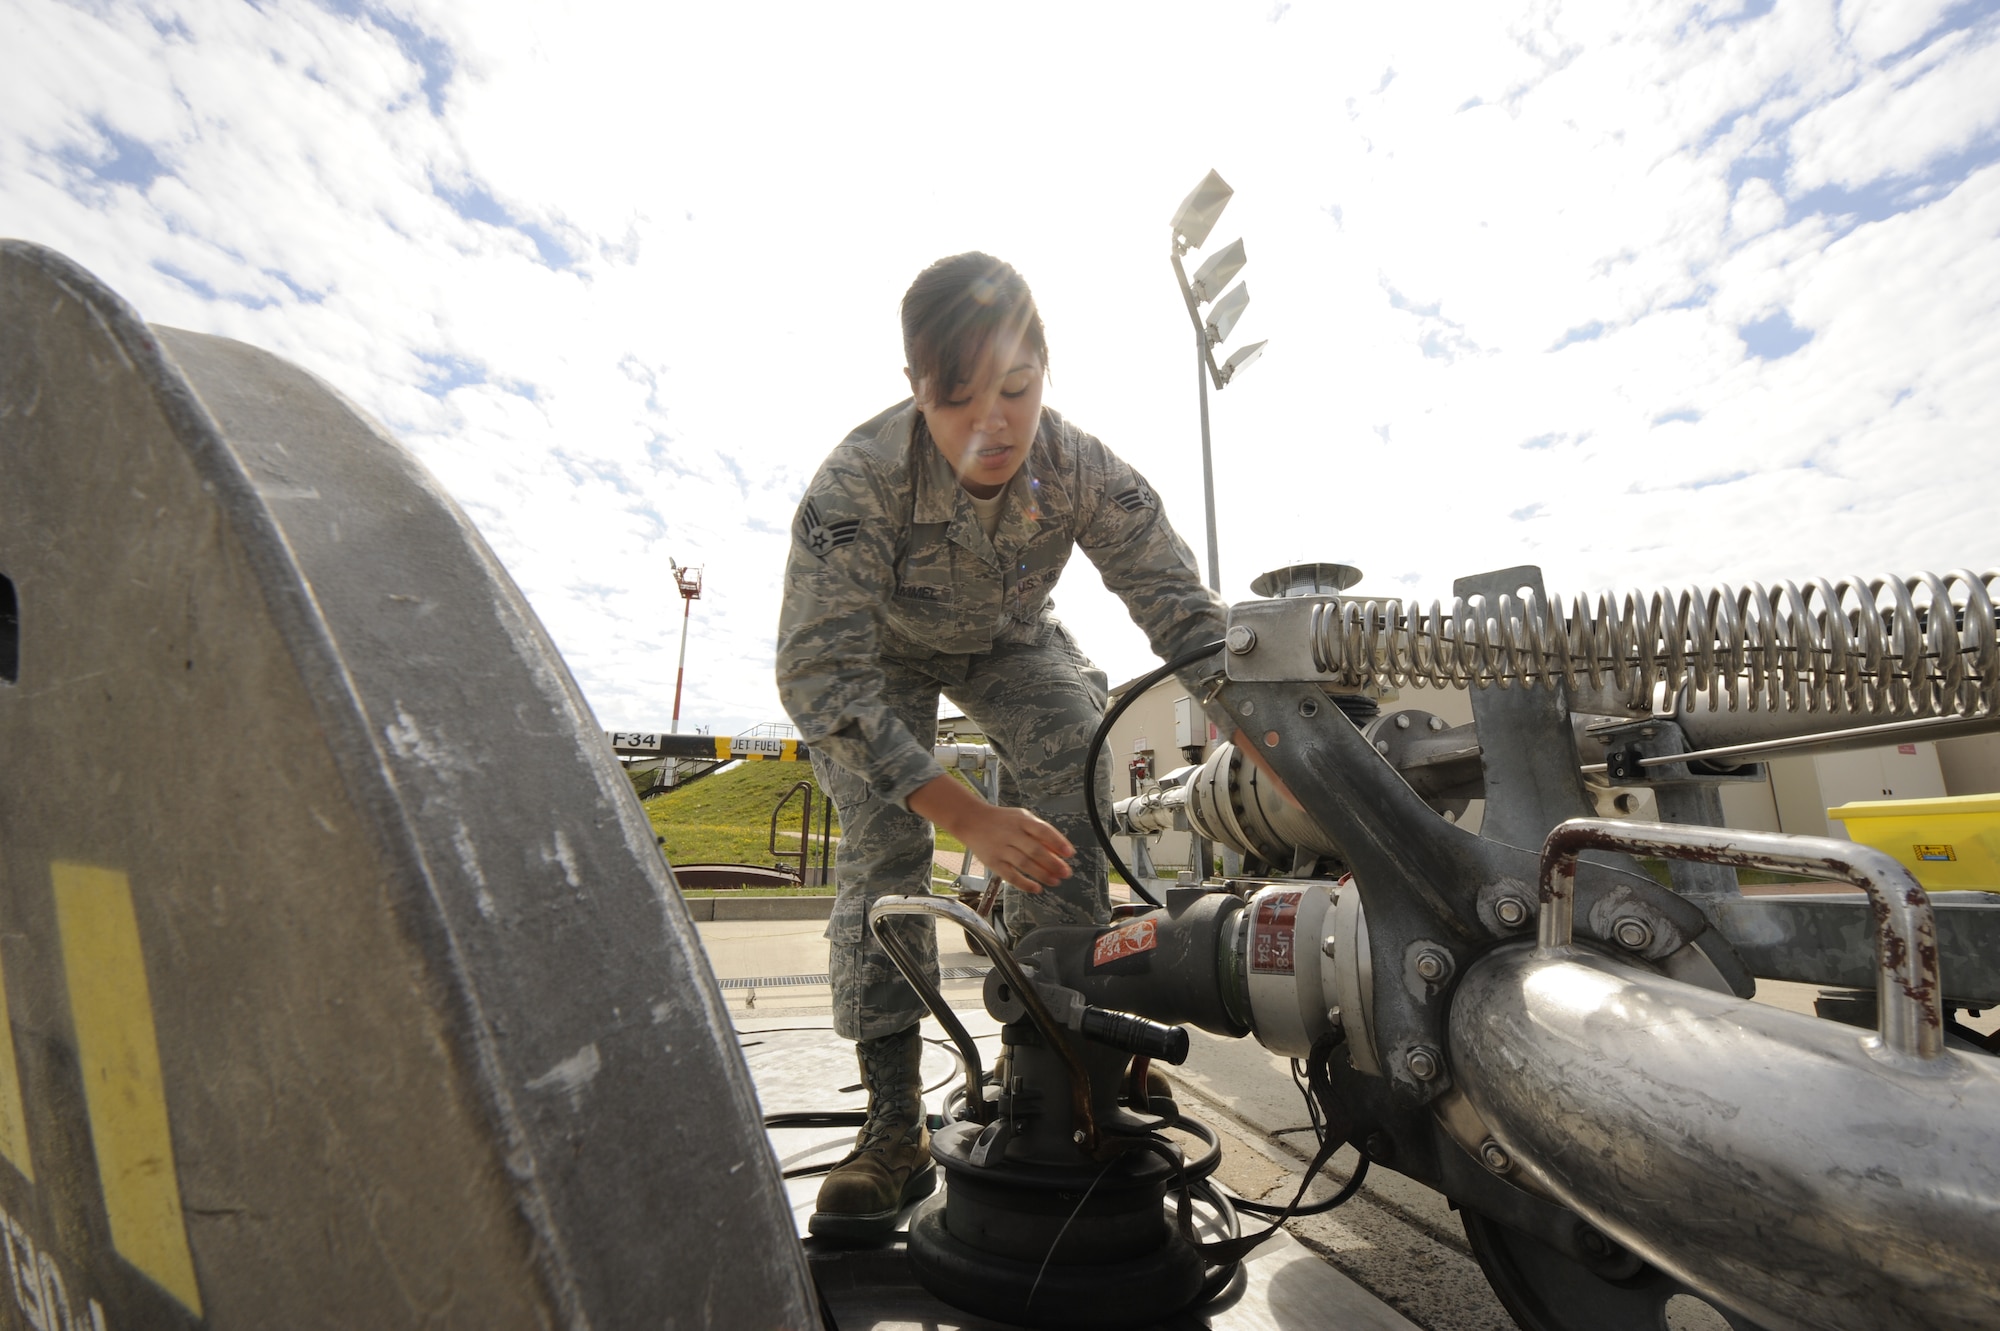 Senior Airman Janine Trammel 86th Logistics Readiness Squadron fuels technician, hooks up a moose head to a fuels pit to prepare for a refuel, on Ramstein Air Base, Germany, July 10, 2012. Fuels help support the mission by continuously providing quality grade jet fuel. (U.S. Air Force photo/ Senior Airman Aaron-Forrest Wainwright)